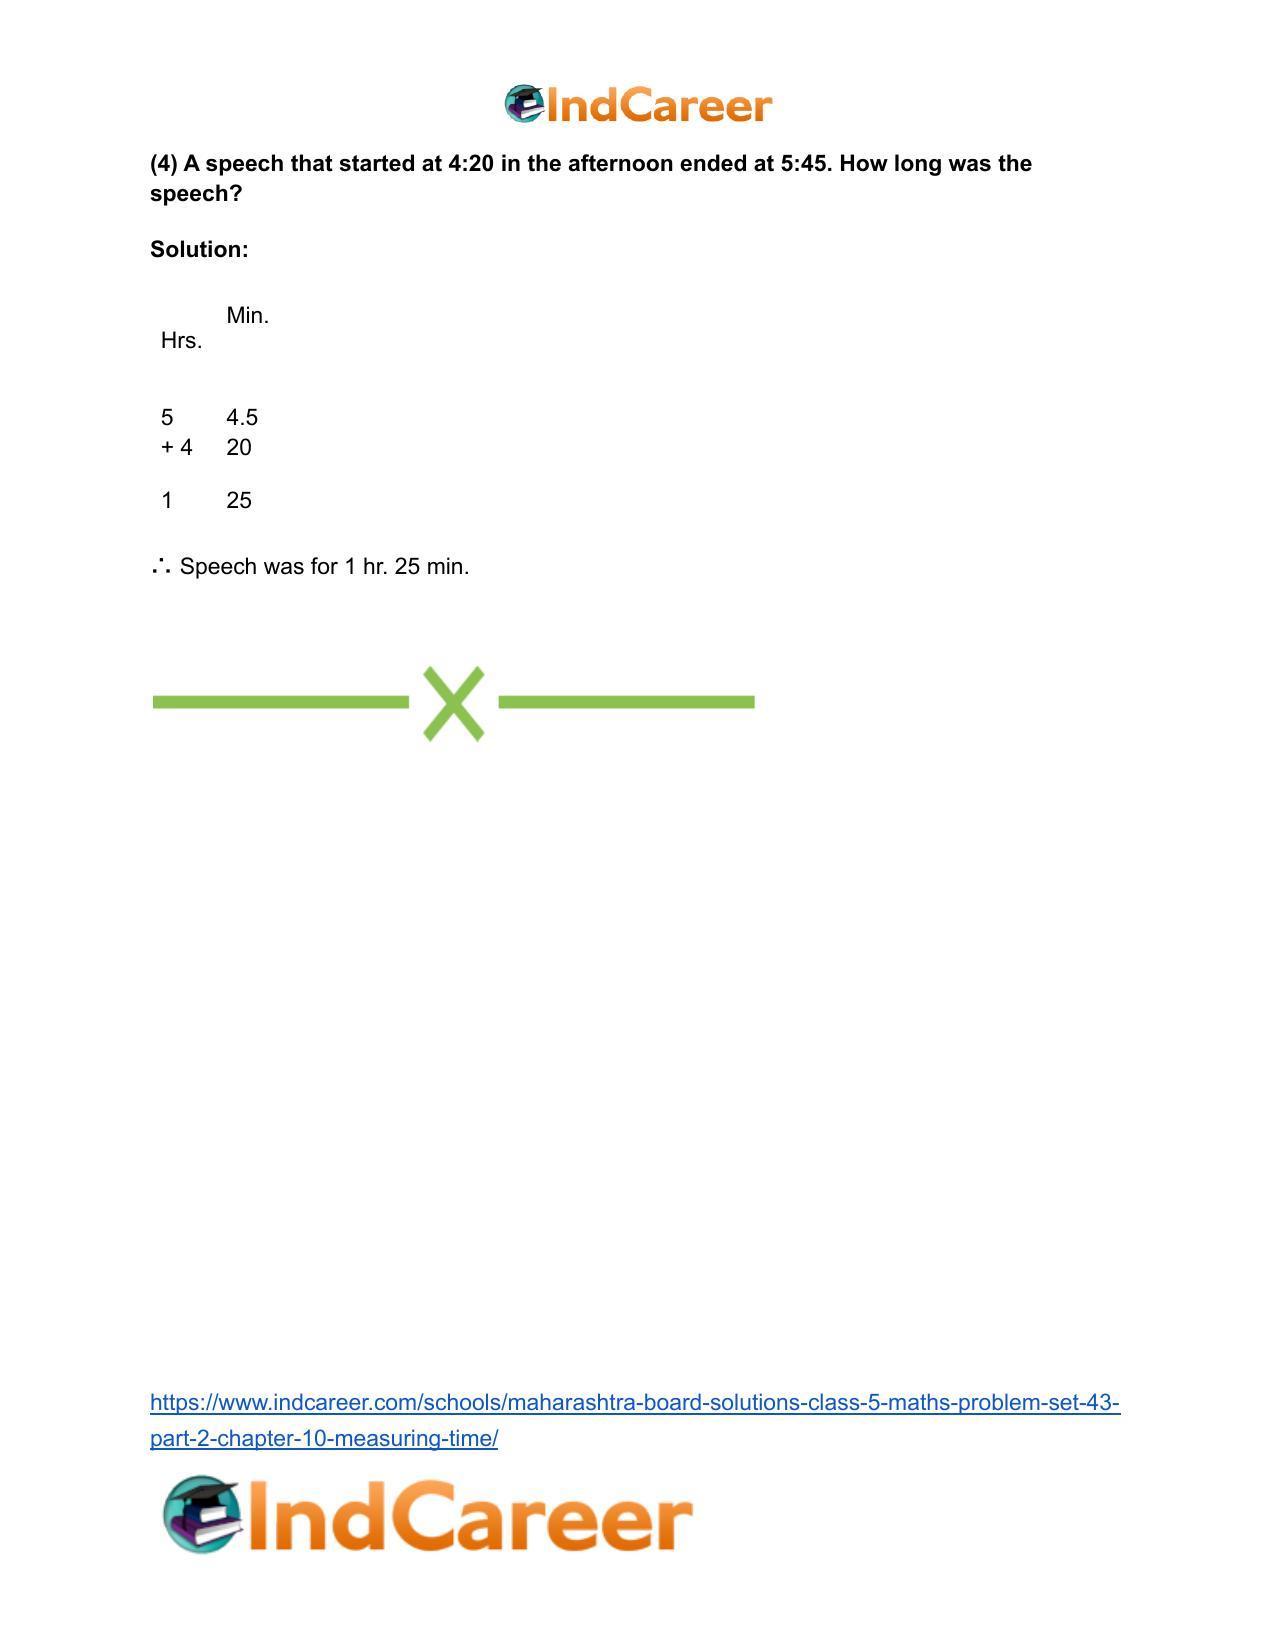 Maharashtra Board Solutions Class 5-Maths (Problem Set 43) - Part 2: Chapter 10- Measuring Time - Page 14